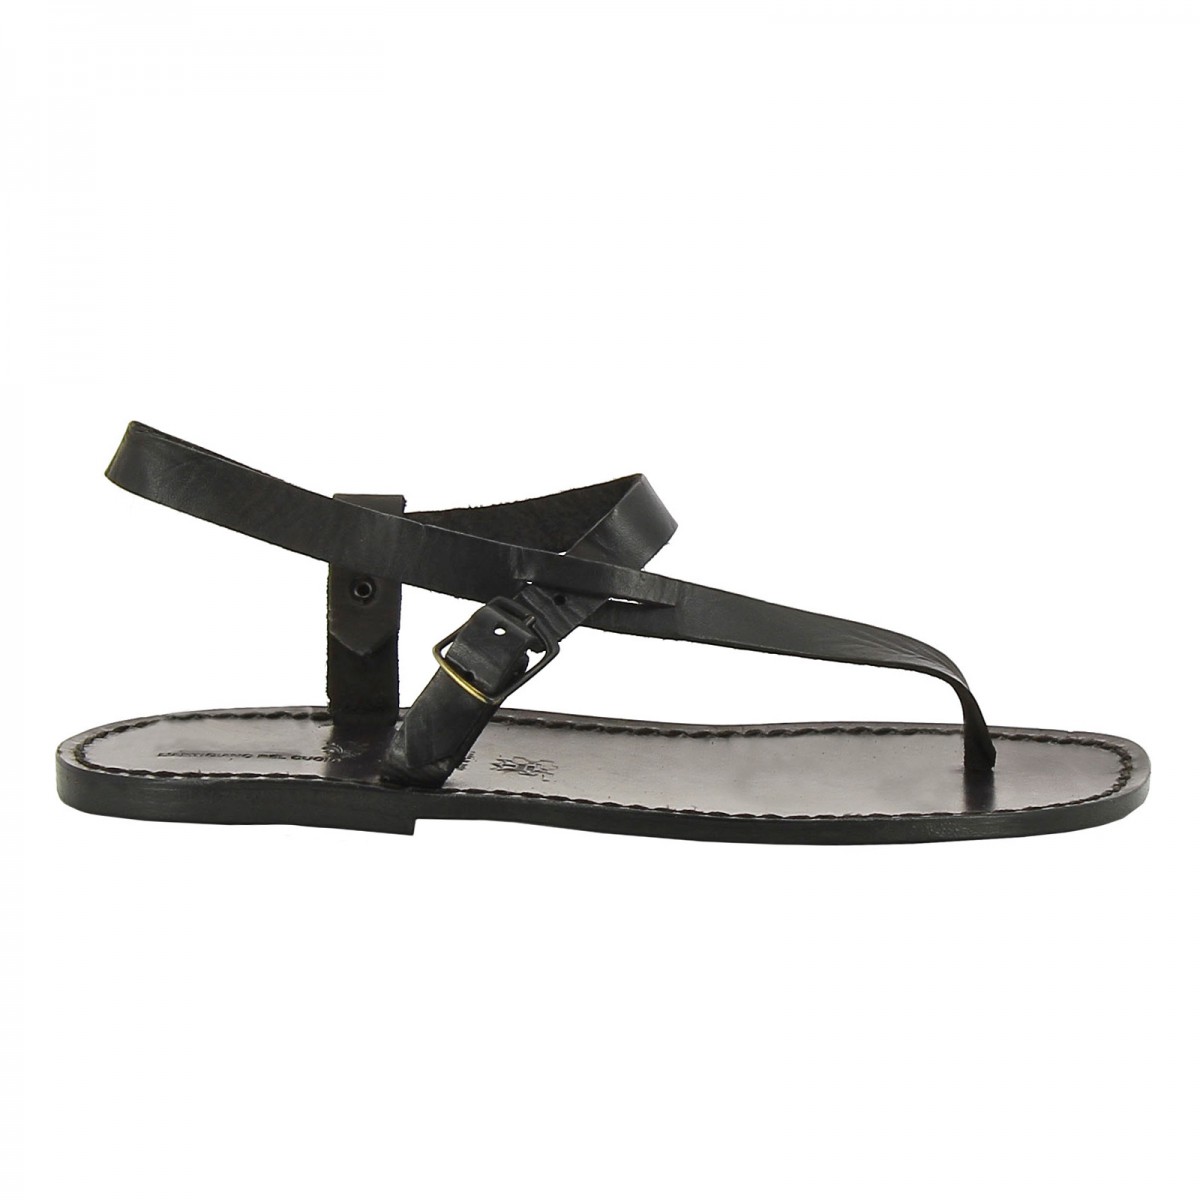 Handmade black leather thong sandals for men | Gianluca - The leather ...